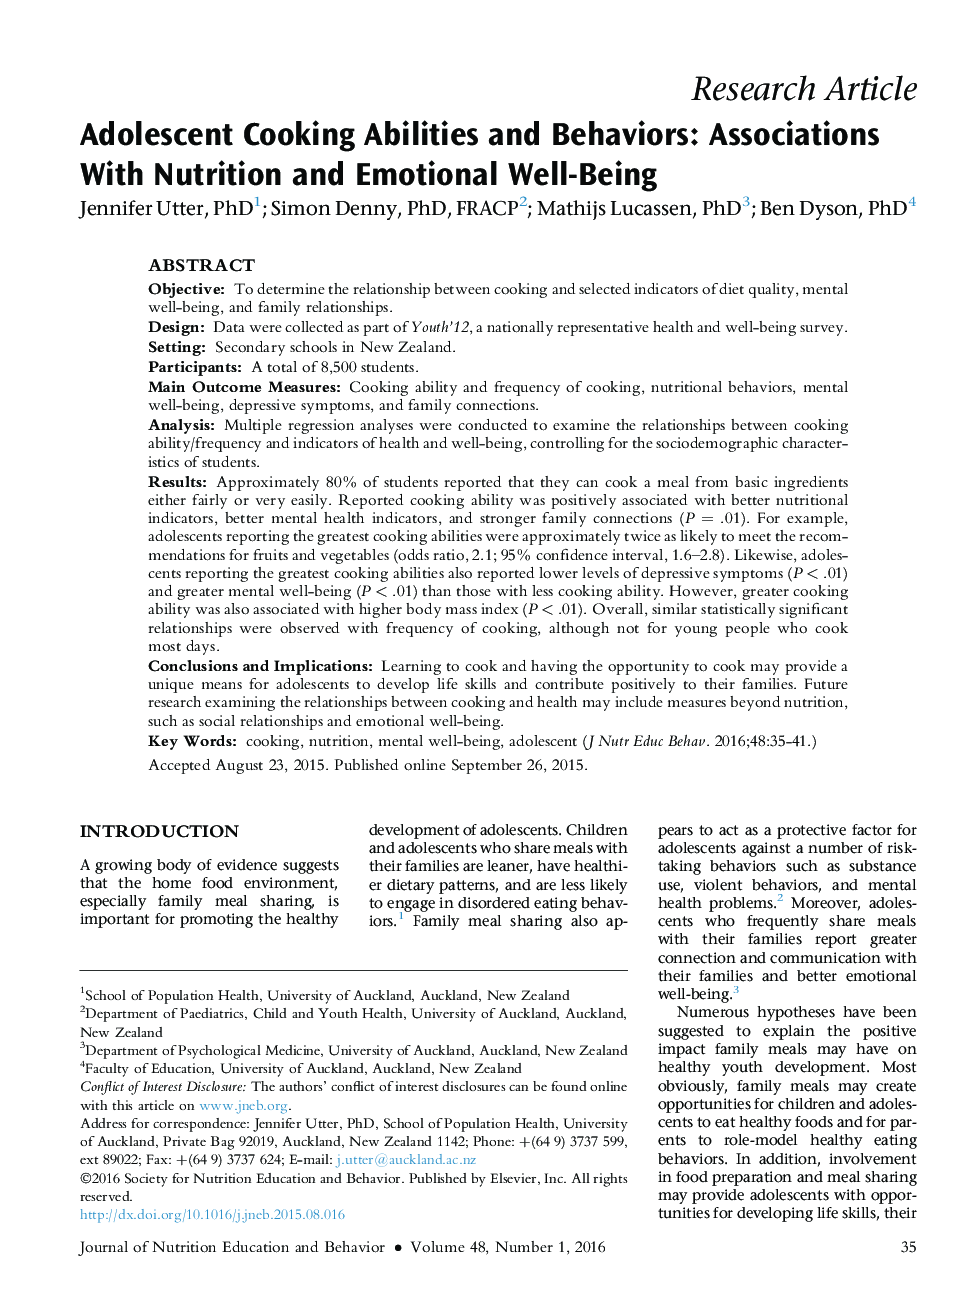 Adolescent Cooking Abilities and Behaviors: Associations With Nutrition and Emotional Well-Being